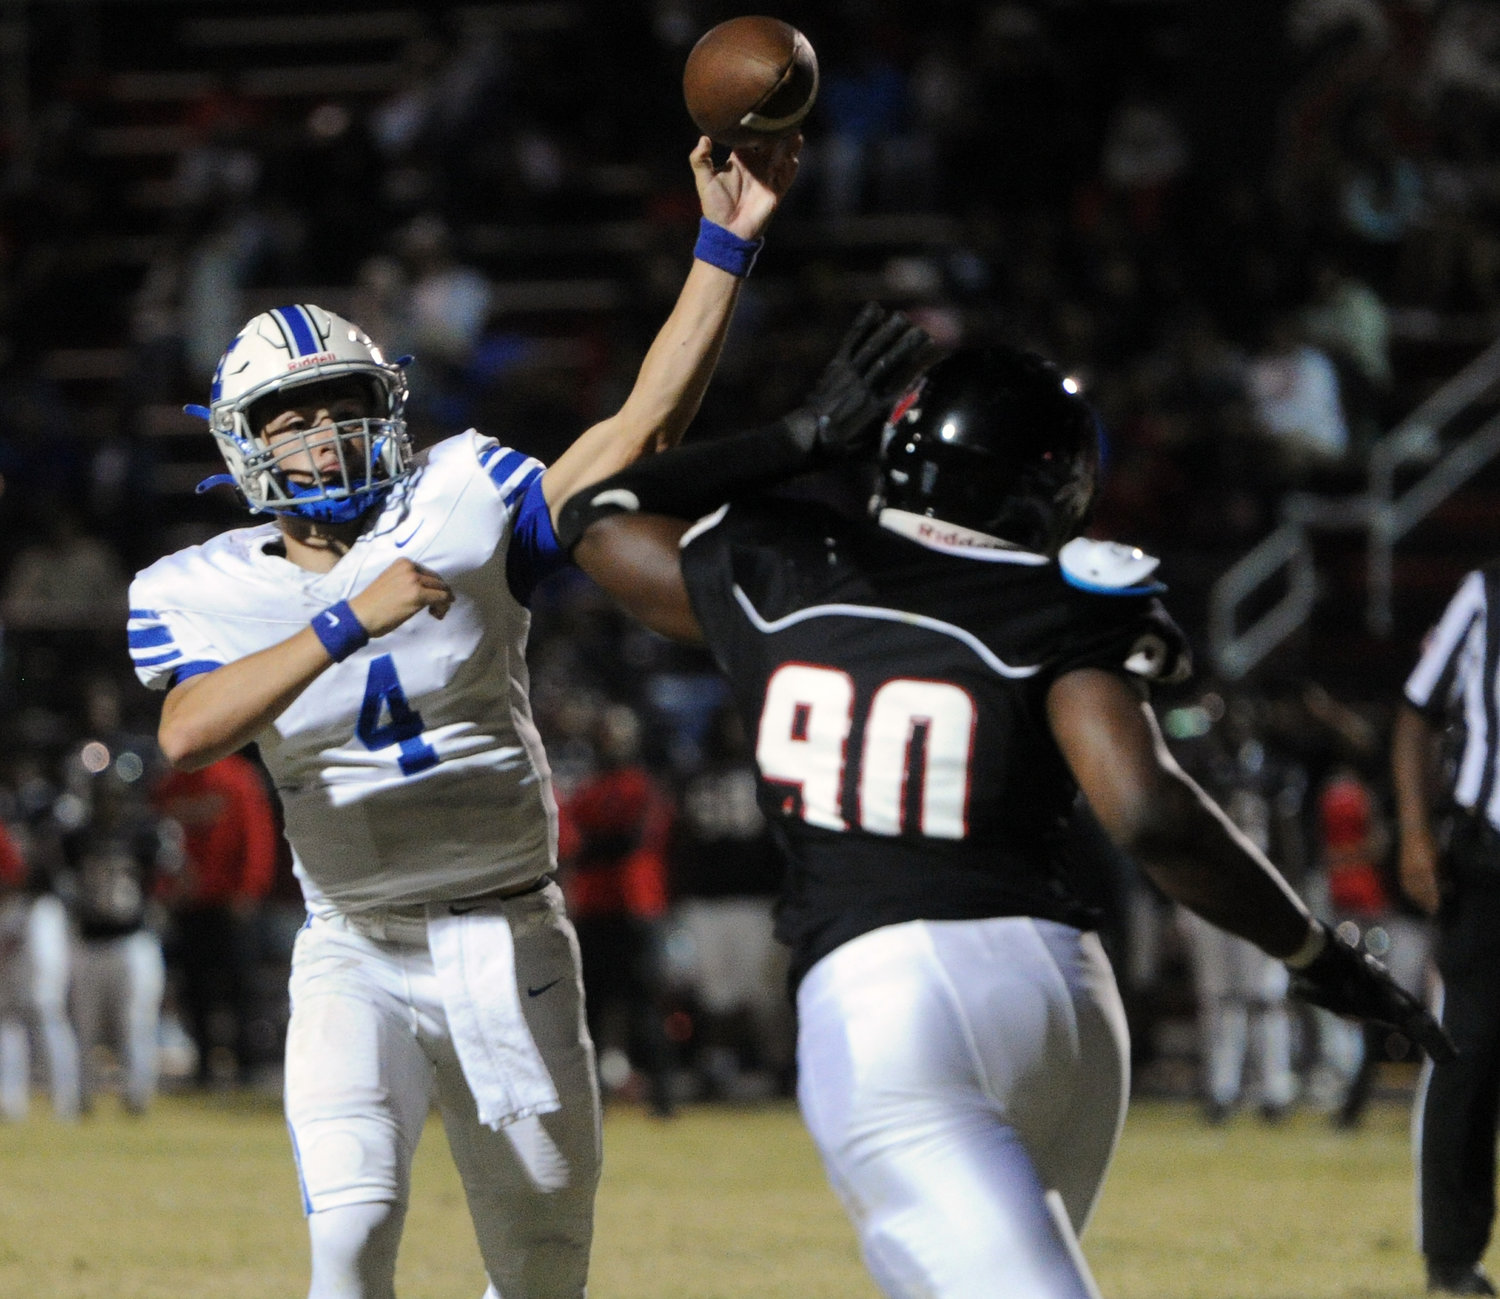 Tiger quarterback Silas Teat fires a throw despite heavy pressure by the Pearl Cohn defense. He had one touchdown pass to Aja Jones on Thursday night.